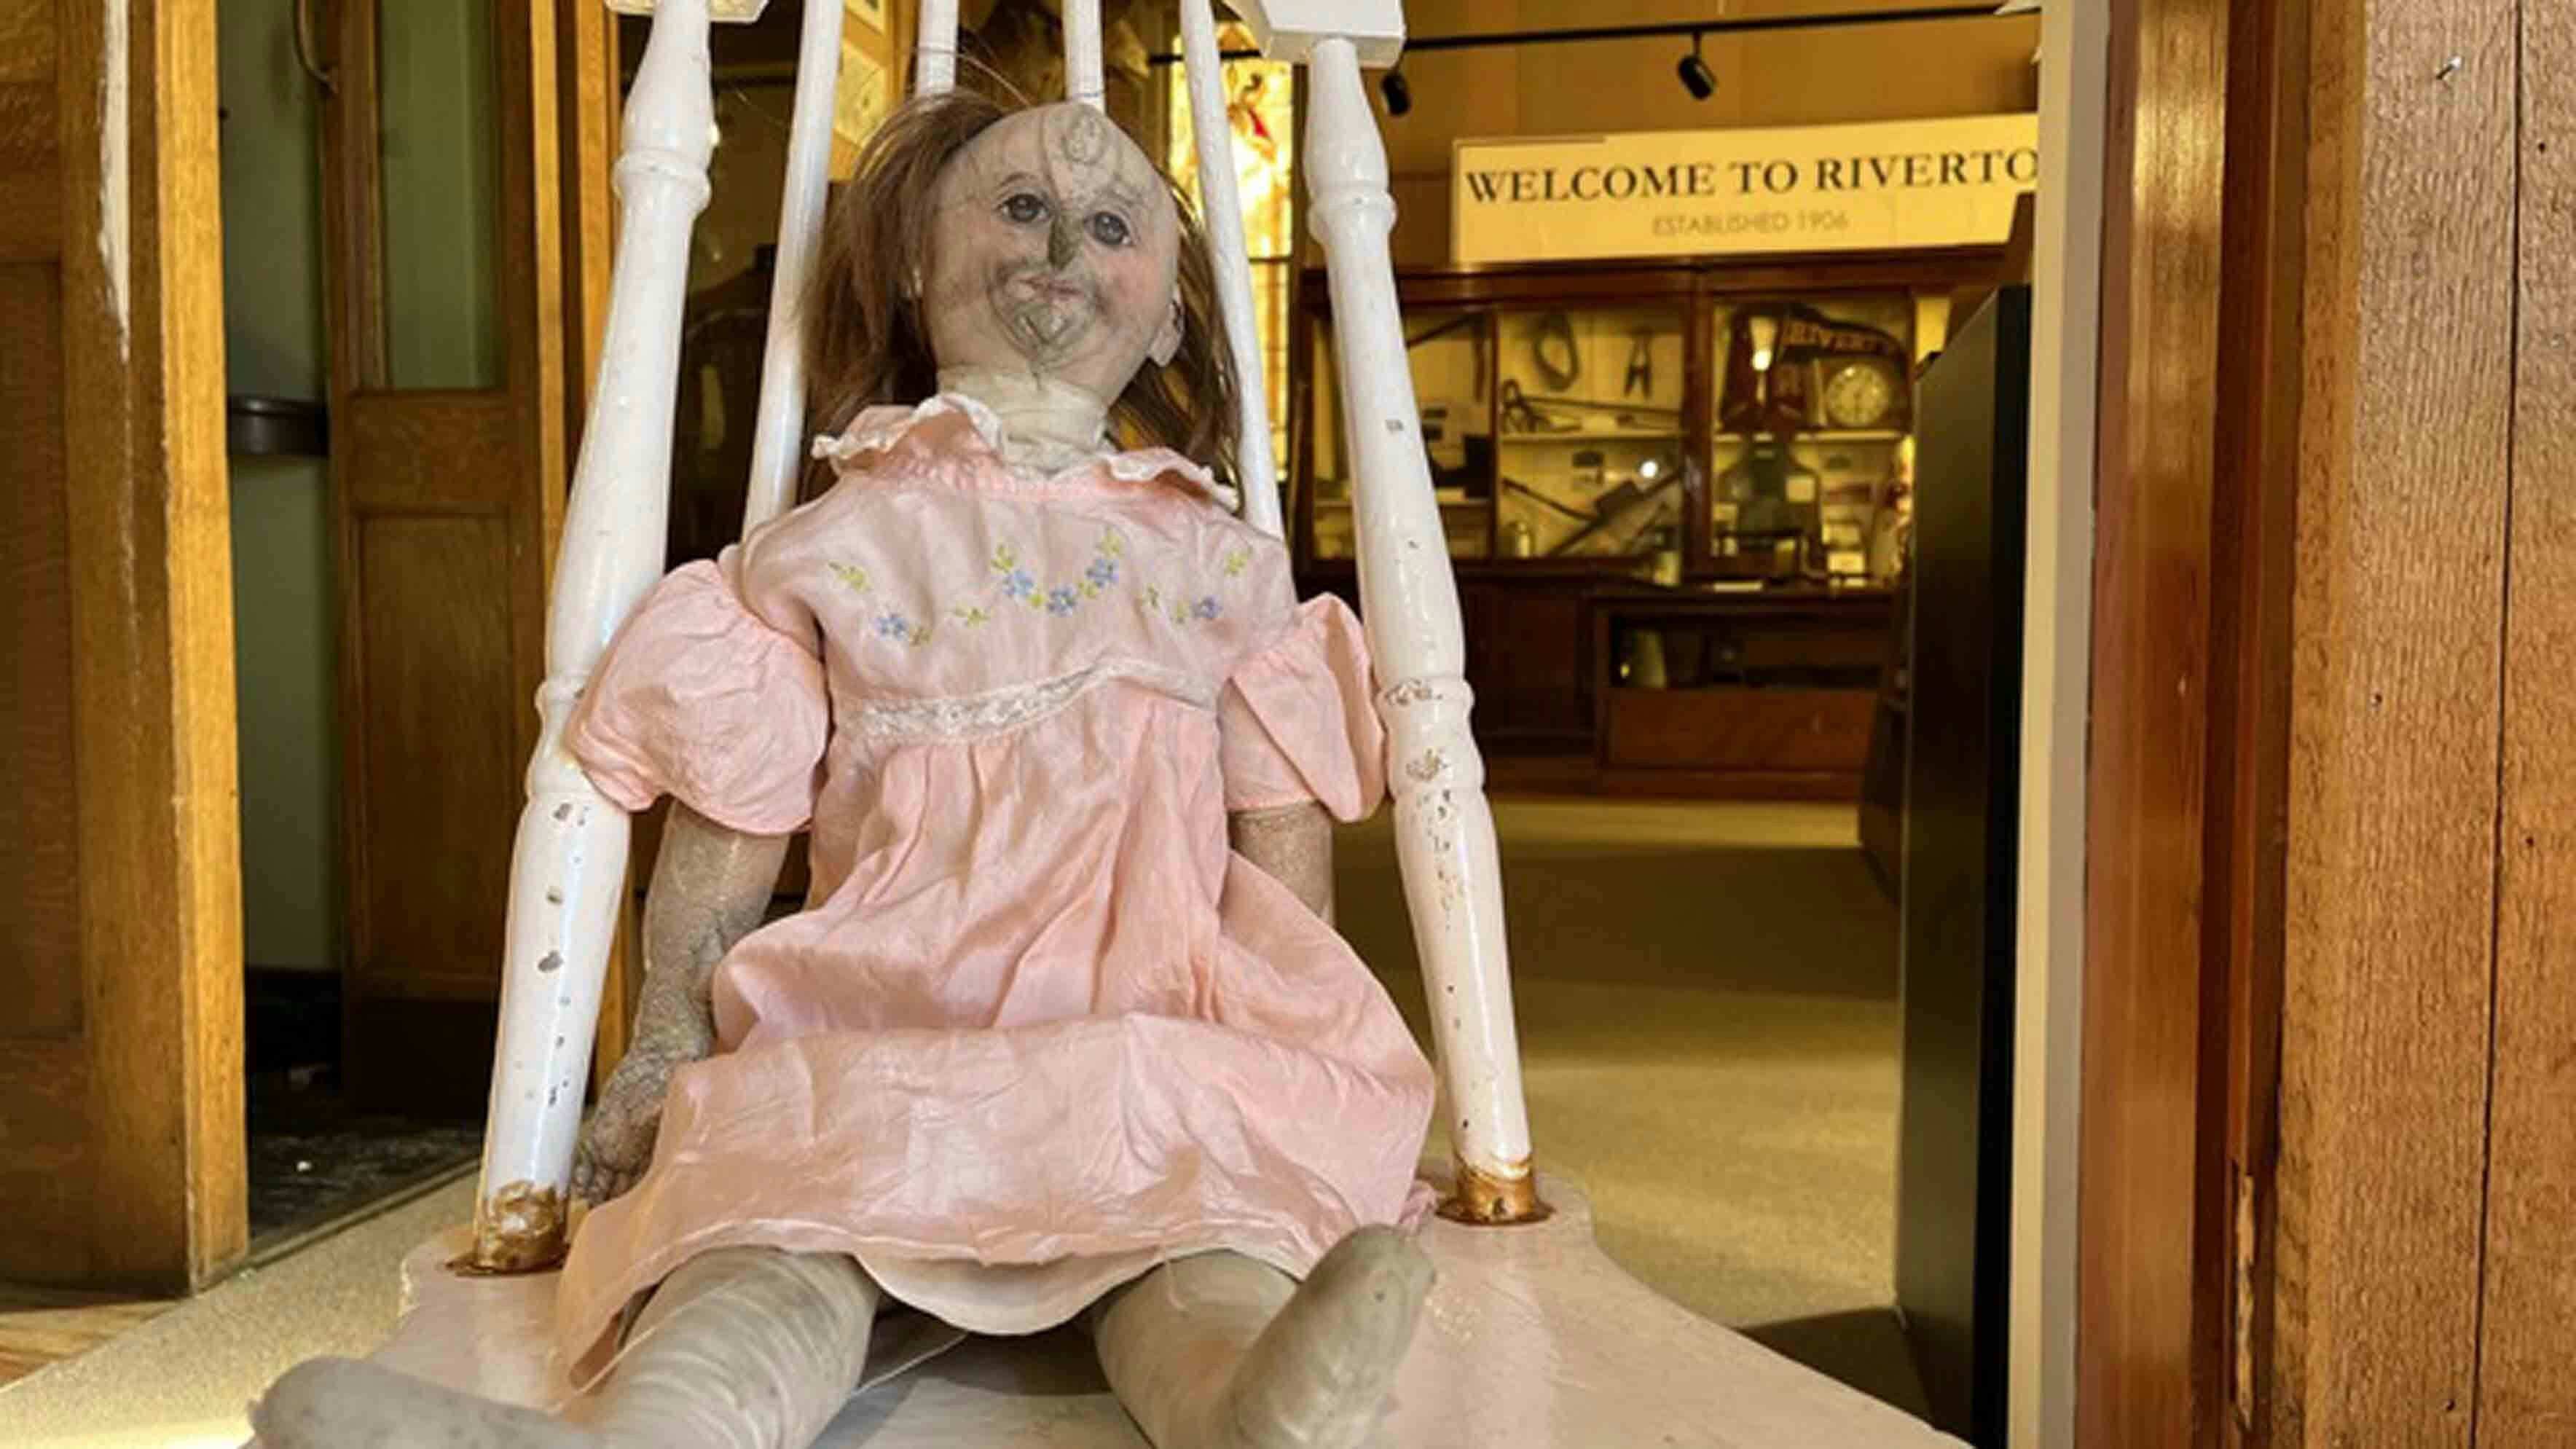 Amelia, which is part of the Riverton Museum's collection, may be the creepiest doll in Wyoming.